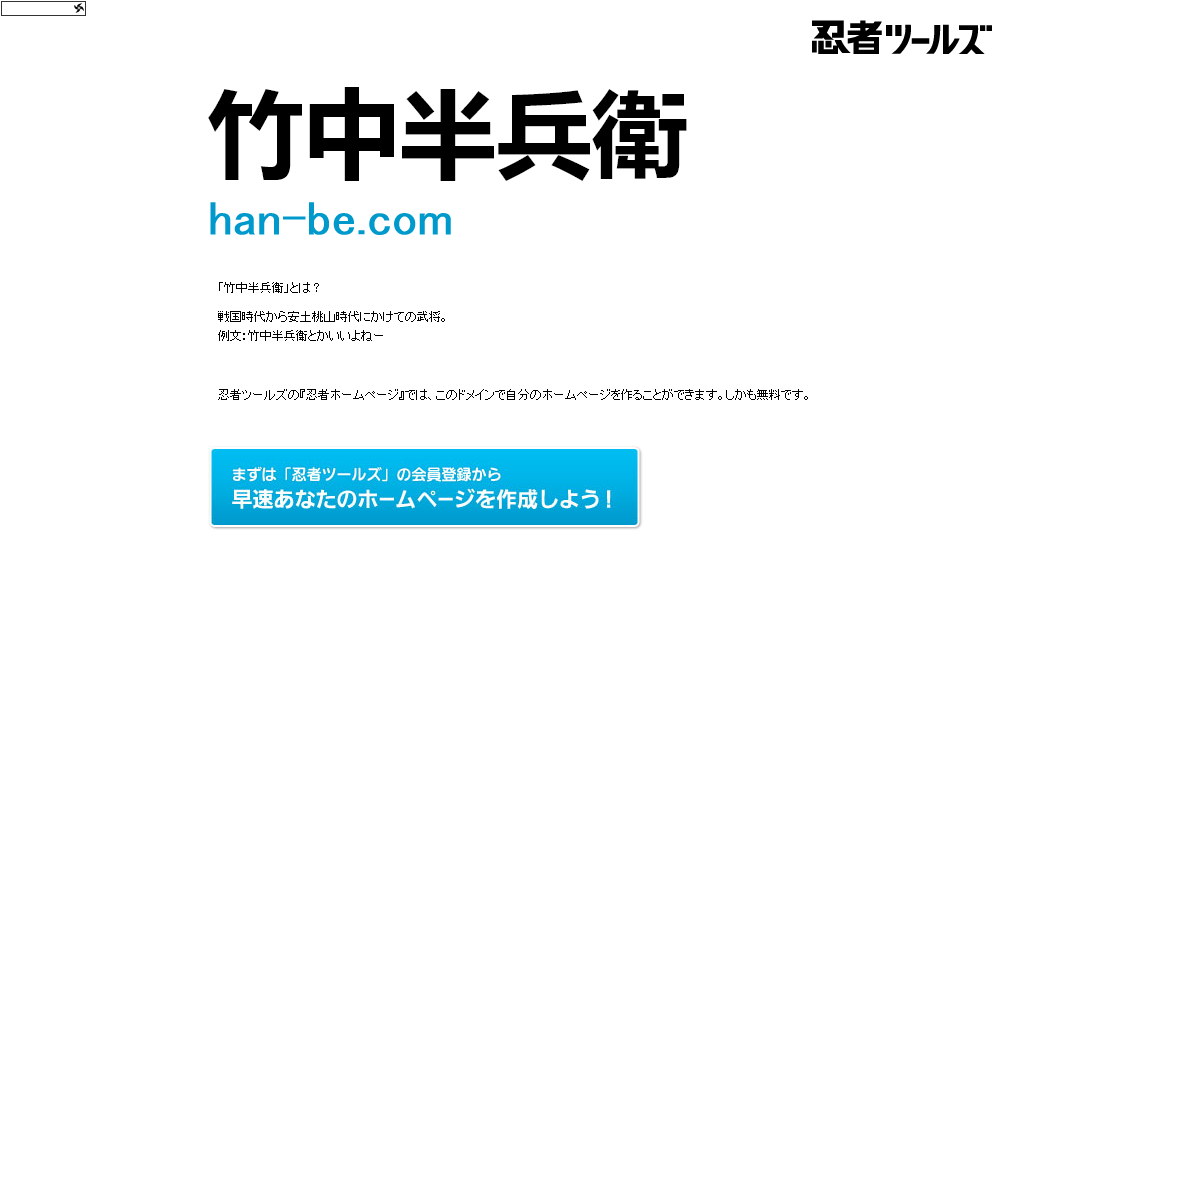 A complete backup of han-be.com